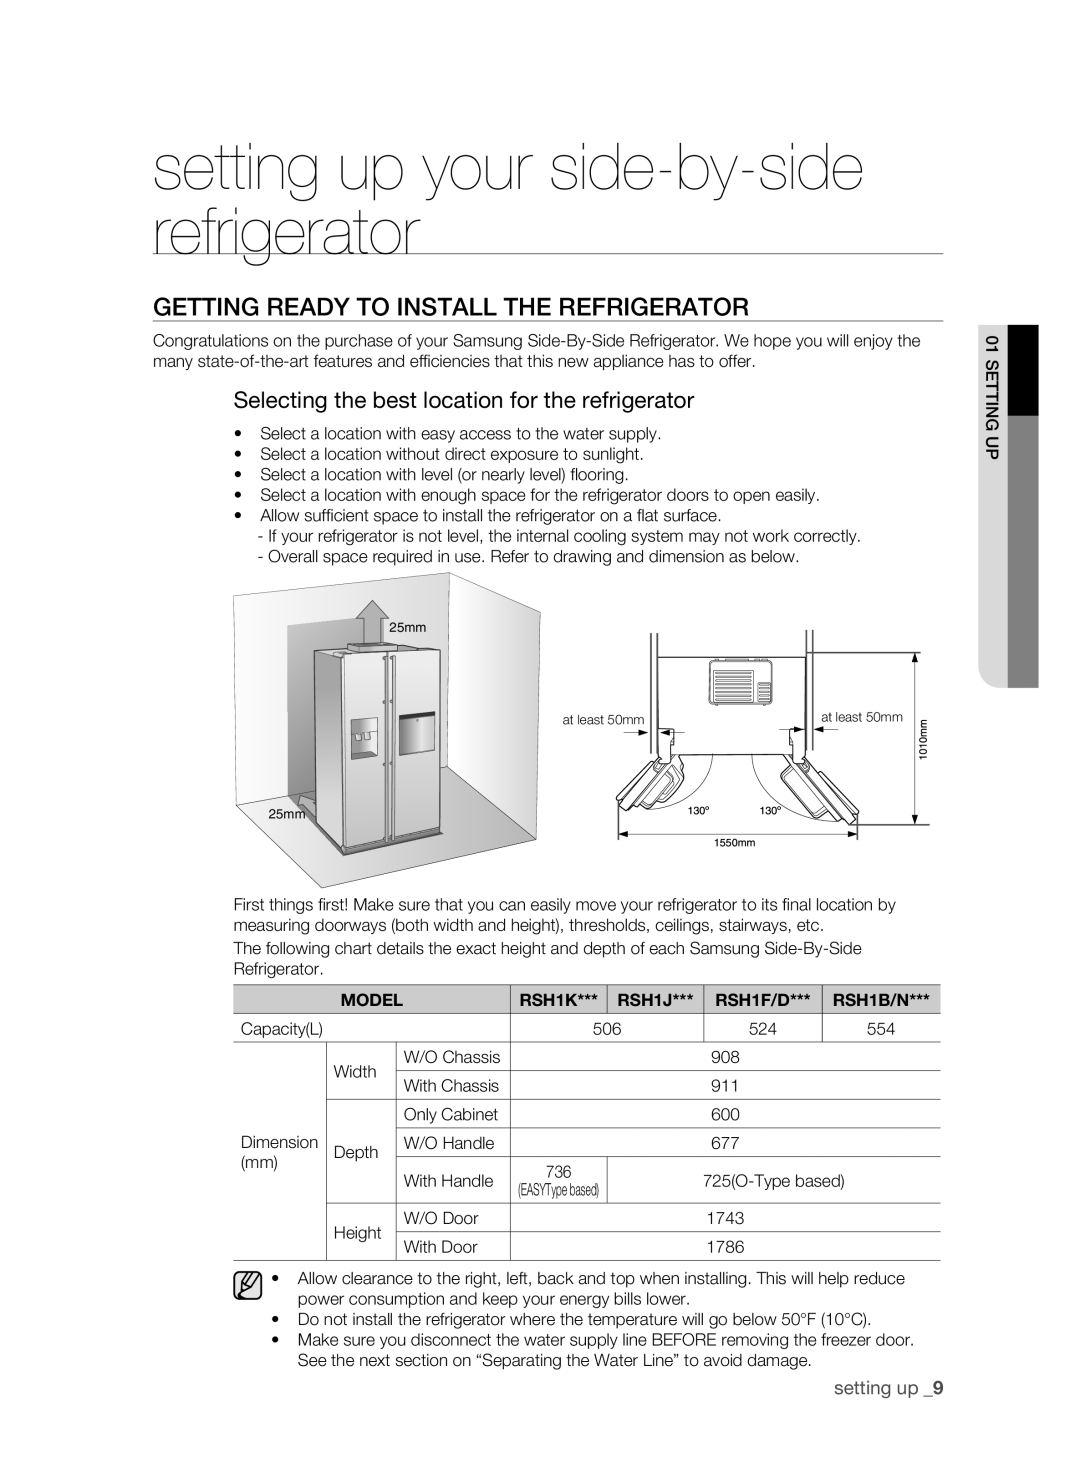 Samsung RSH1J setting up your side-by-side refrigerator, Getting ready to install the refrigerator, setting up , Model 